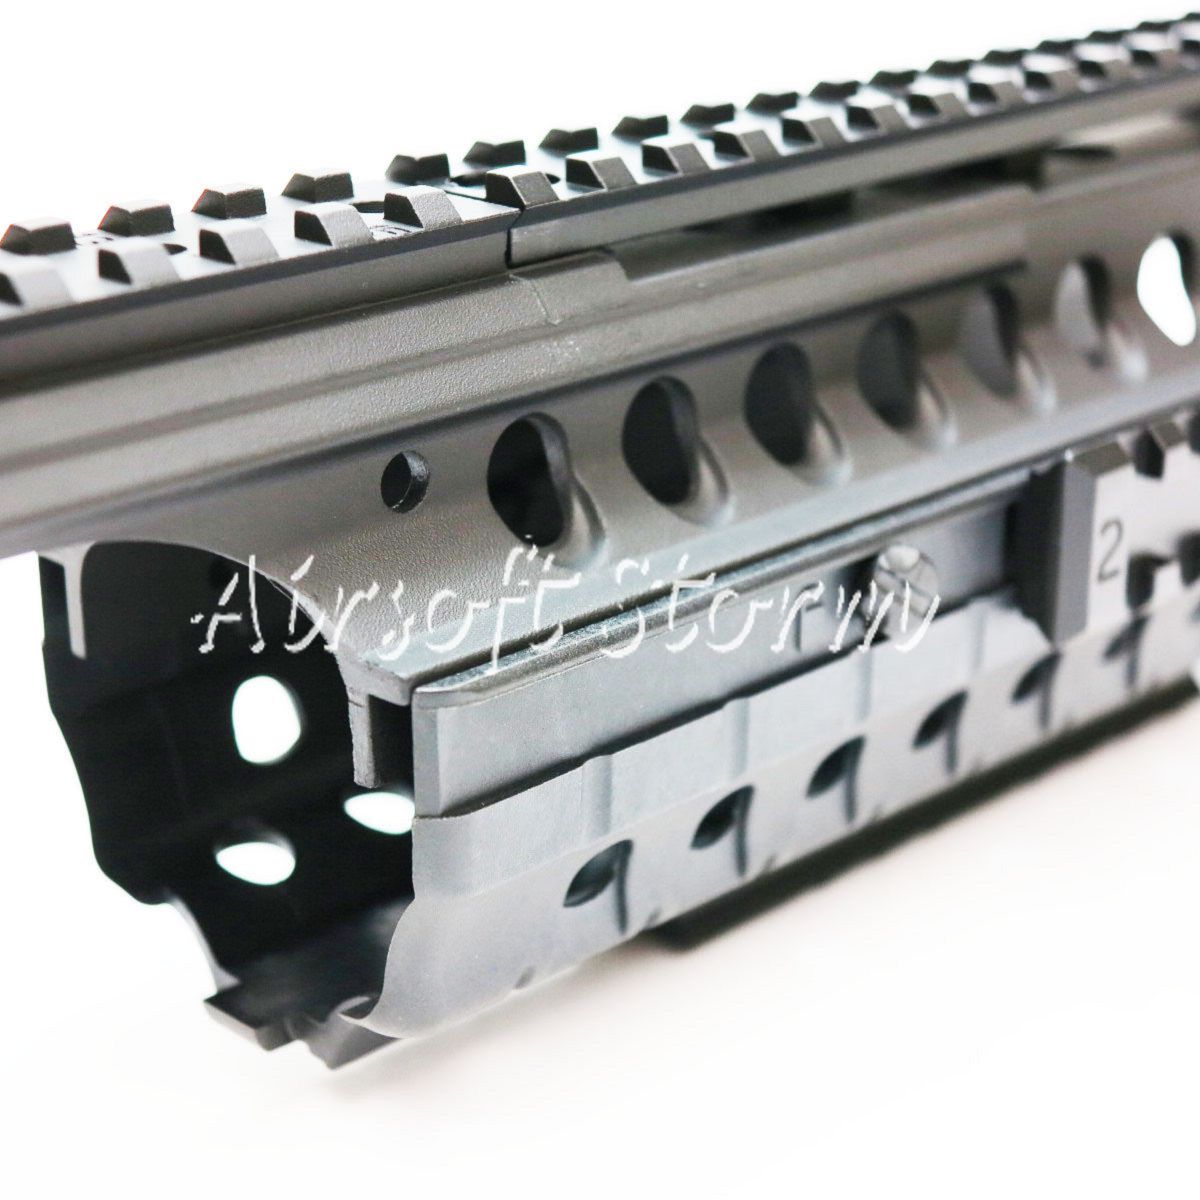 Shooting Gear D-Boys ARMS Style SIR System Rail Handguard for M4 Series AEG - Click Image to Close